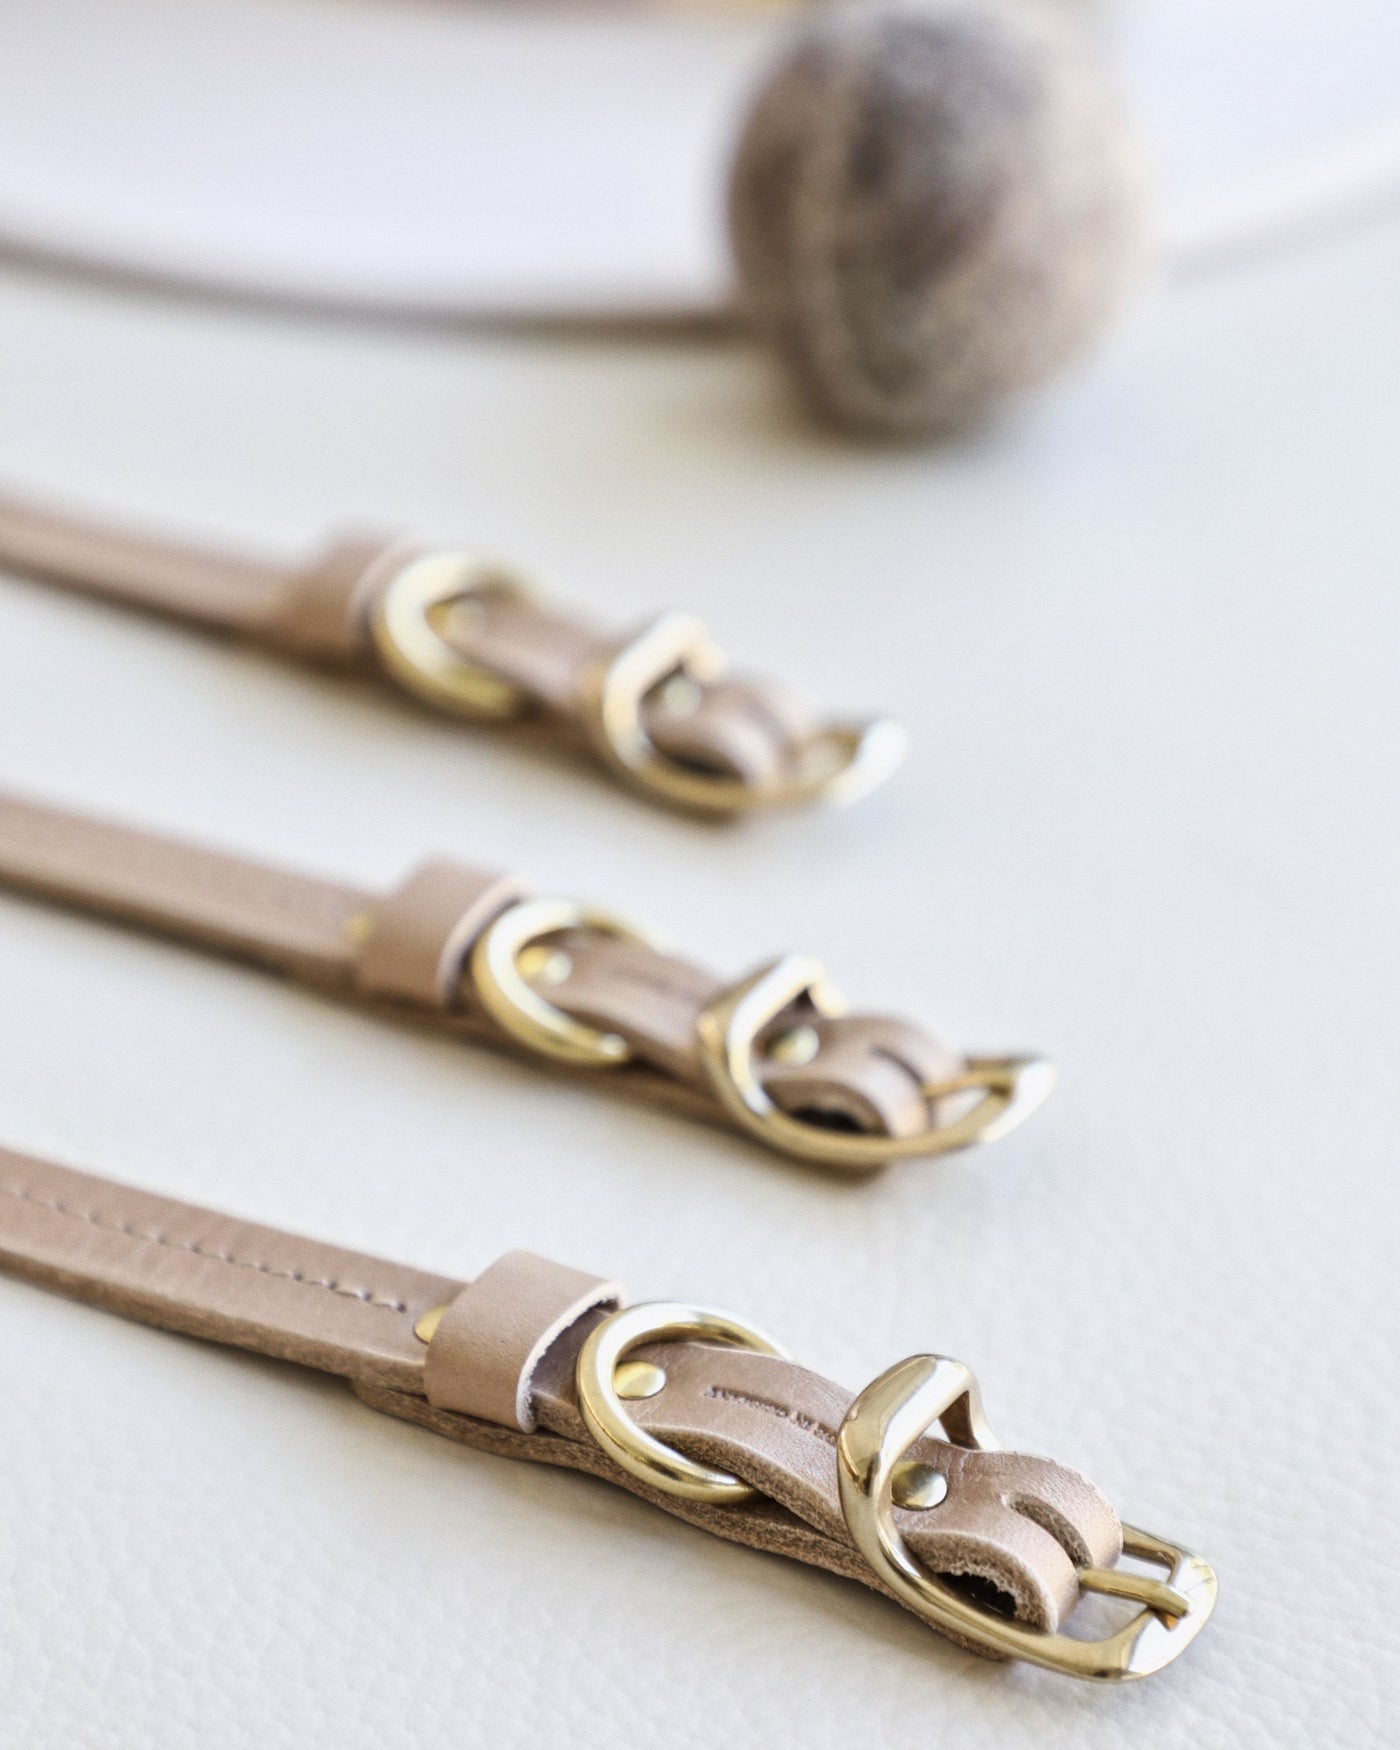 Closeup of gold buckles on taupe leather dog collar